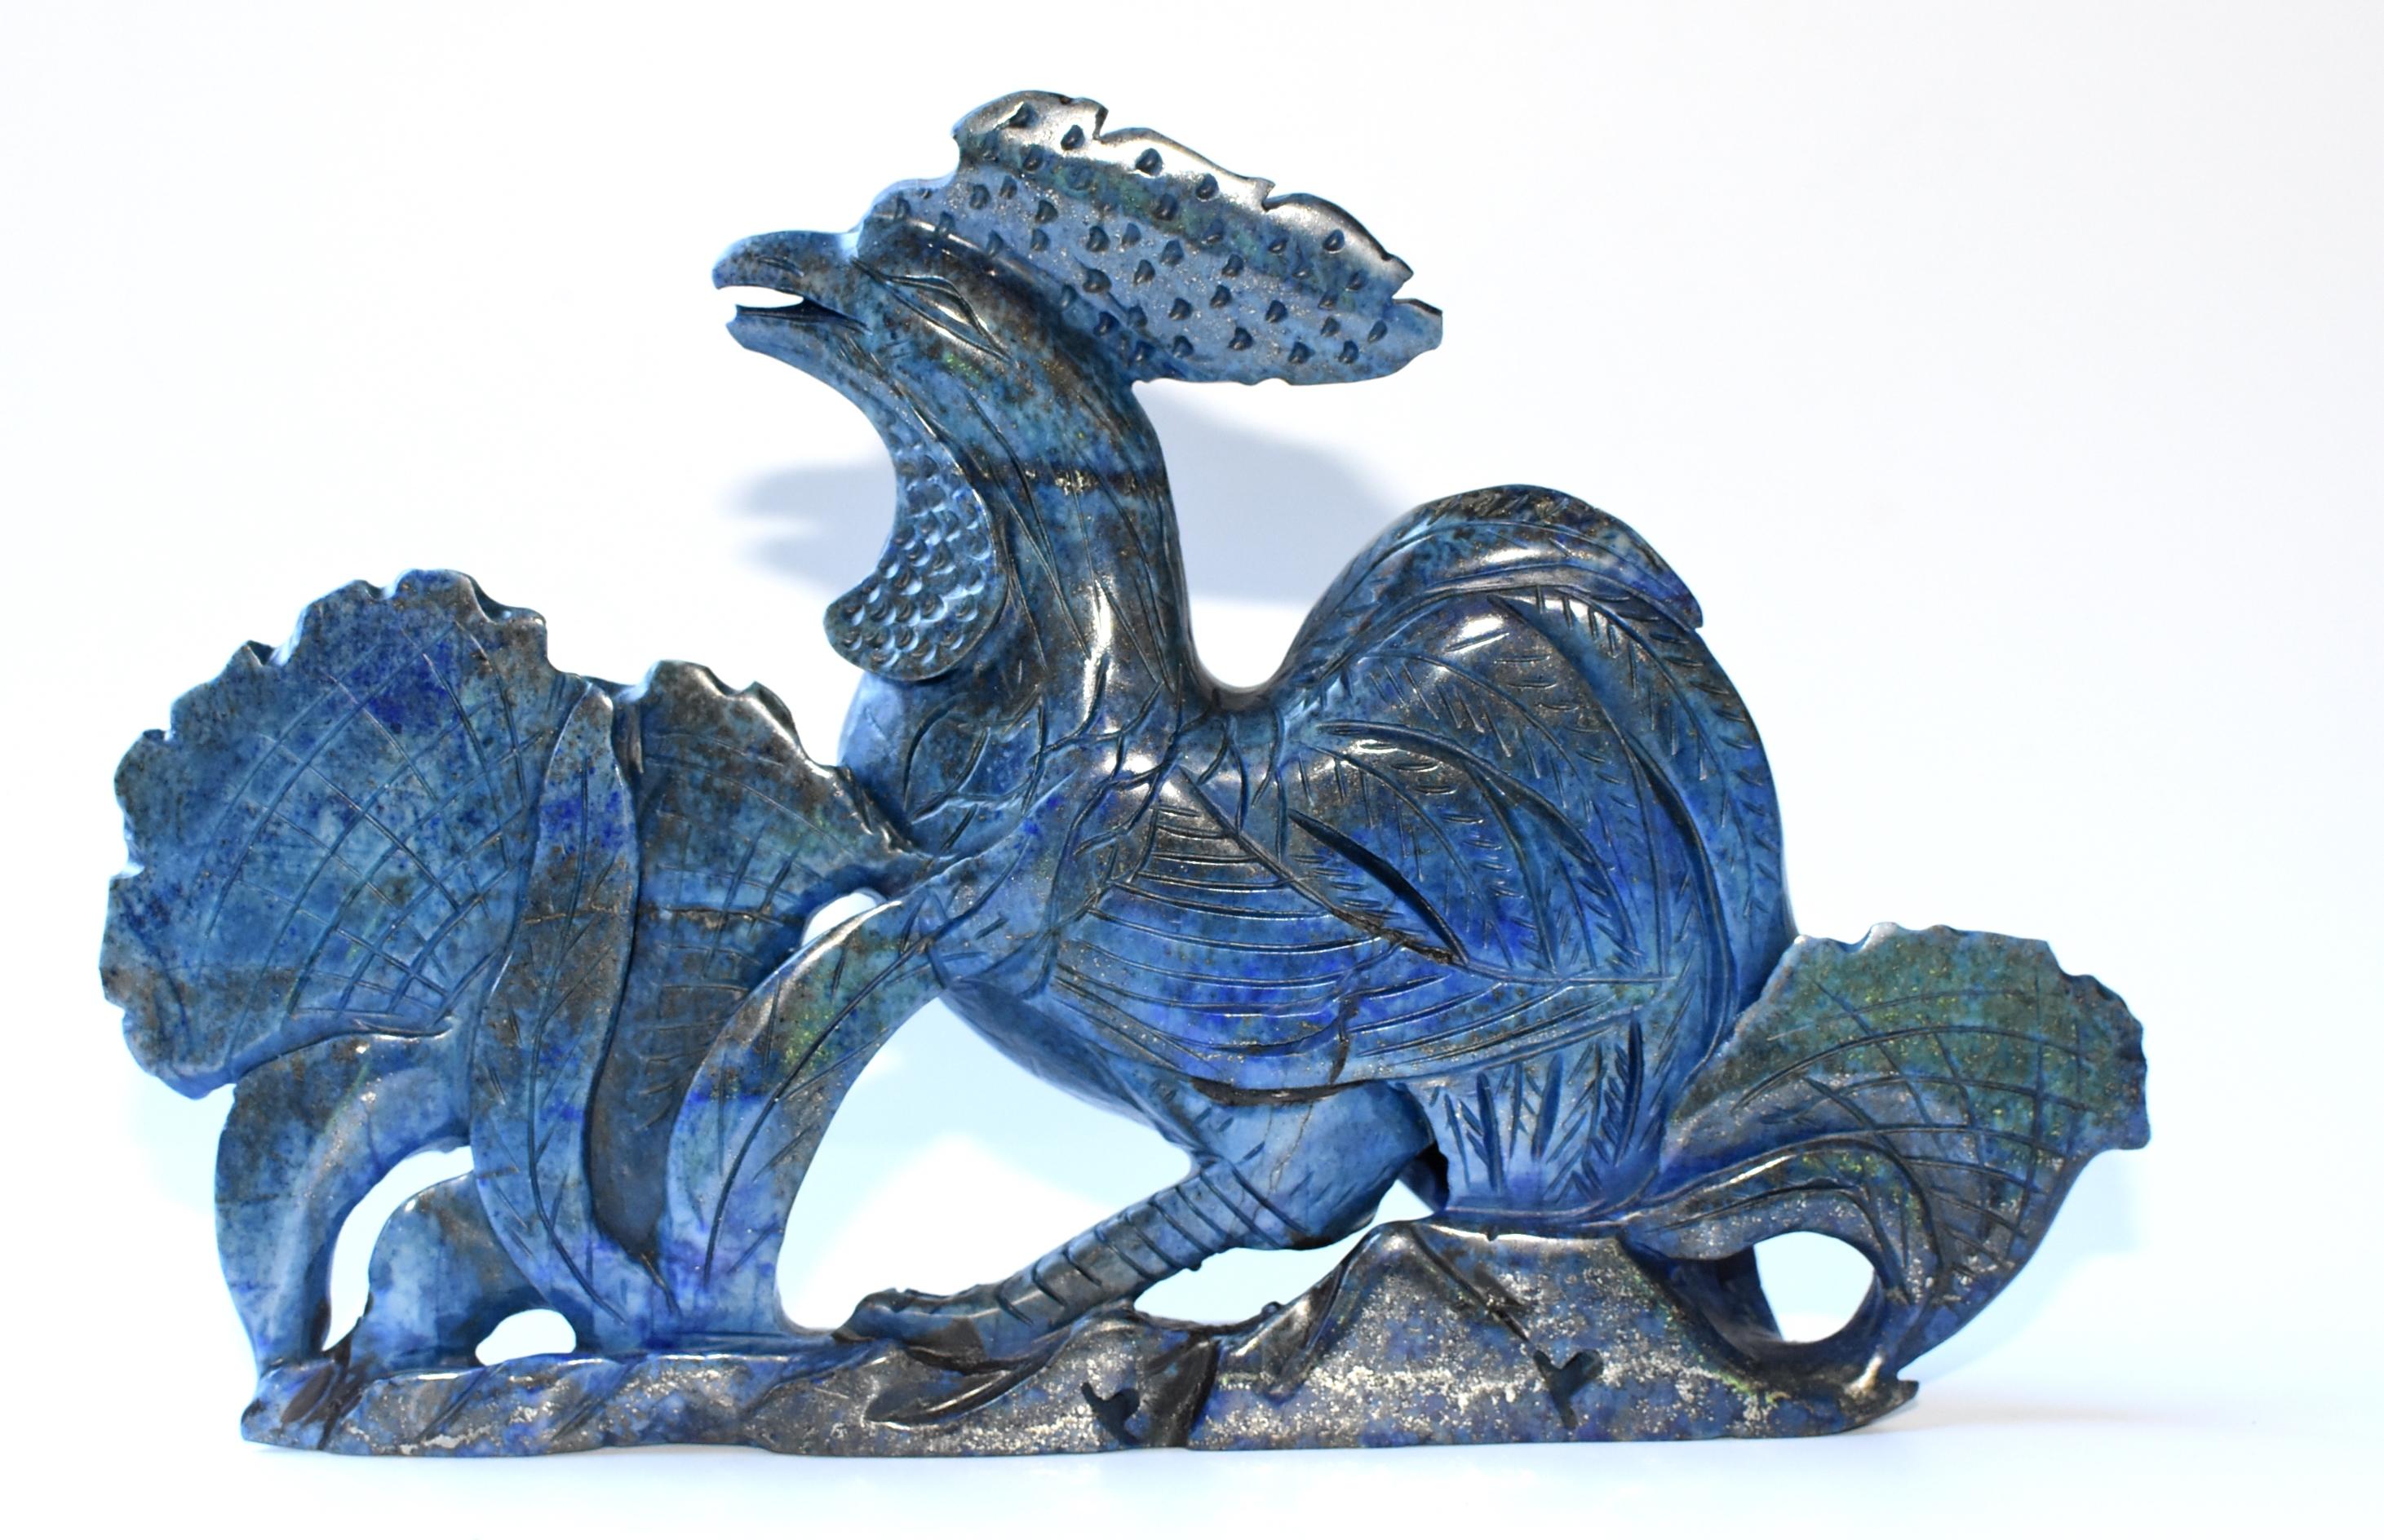 Beautiful lapis sculpture of a rooster. All natural lapis lazulli weighing 2 lb. Nicely carved. A great auspicious symbol for good news and prosperity.

